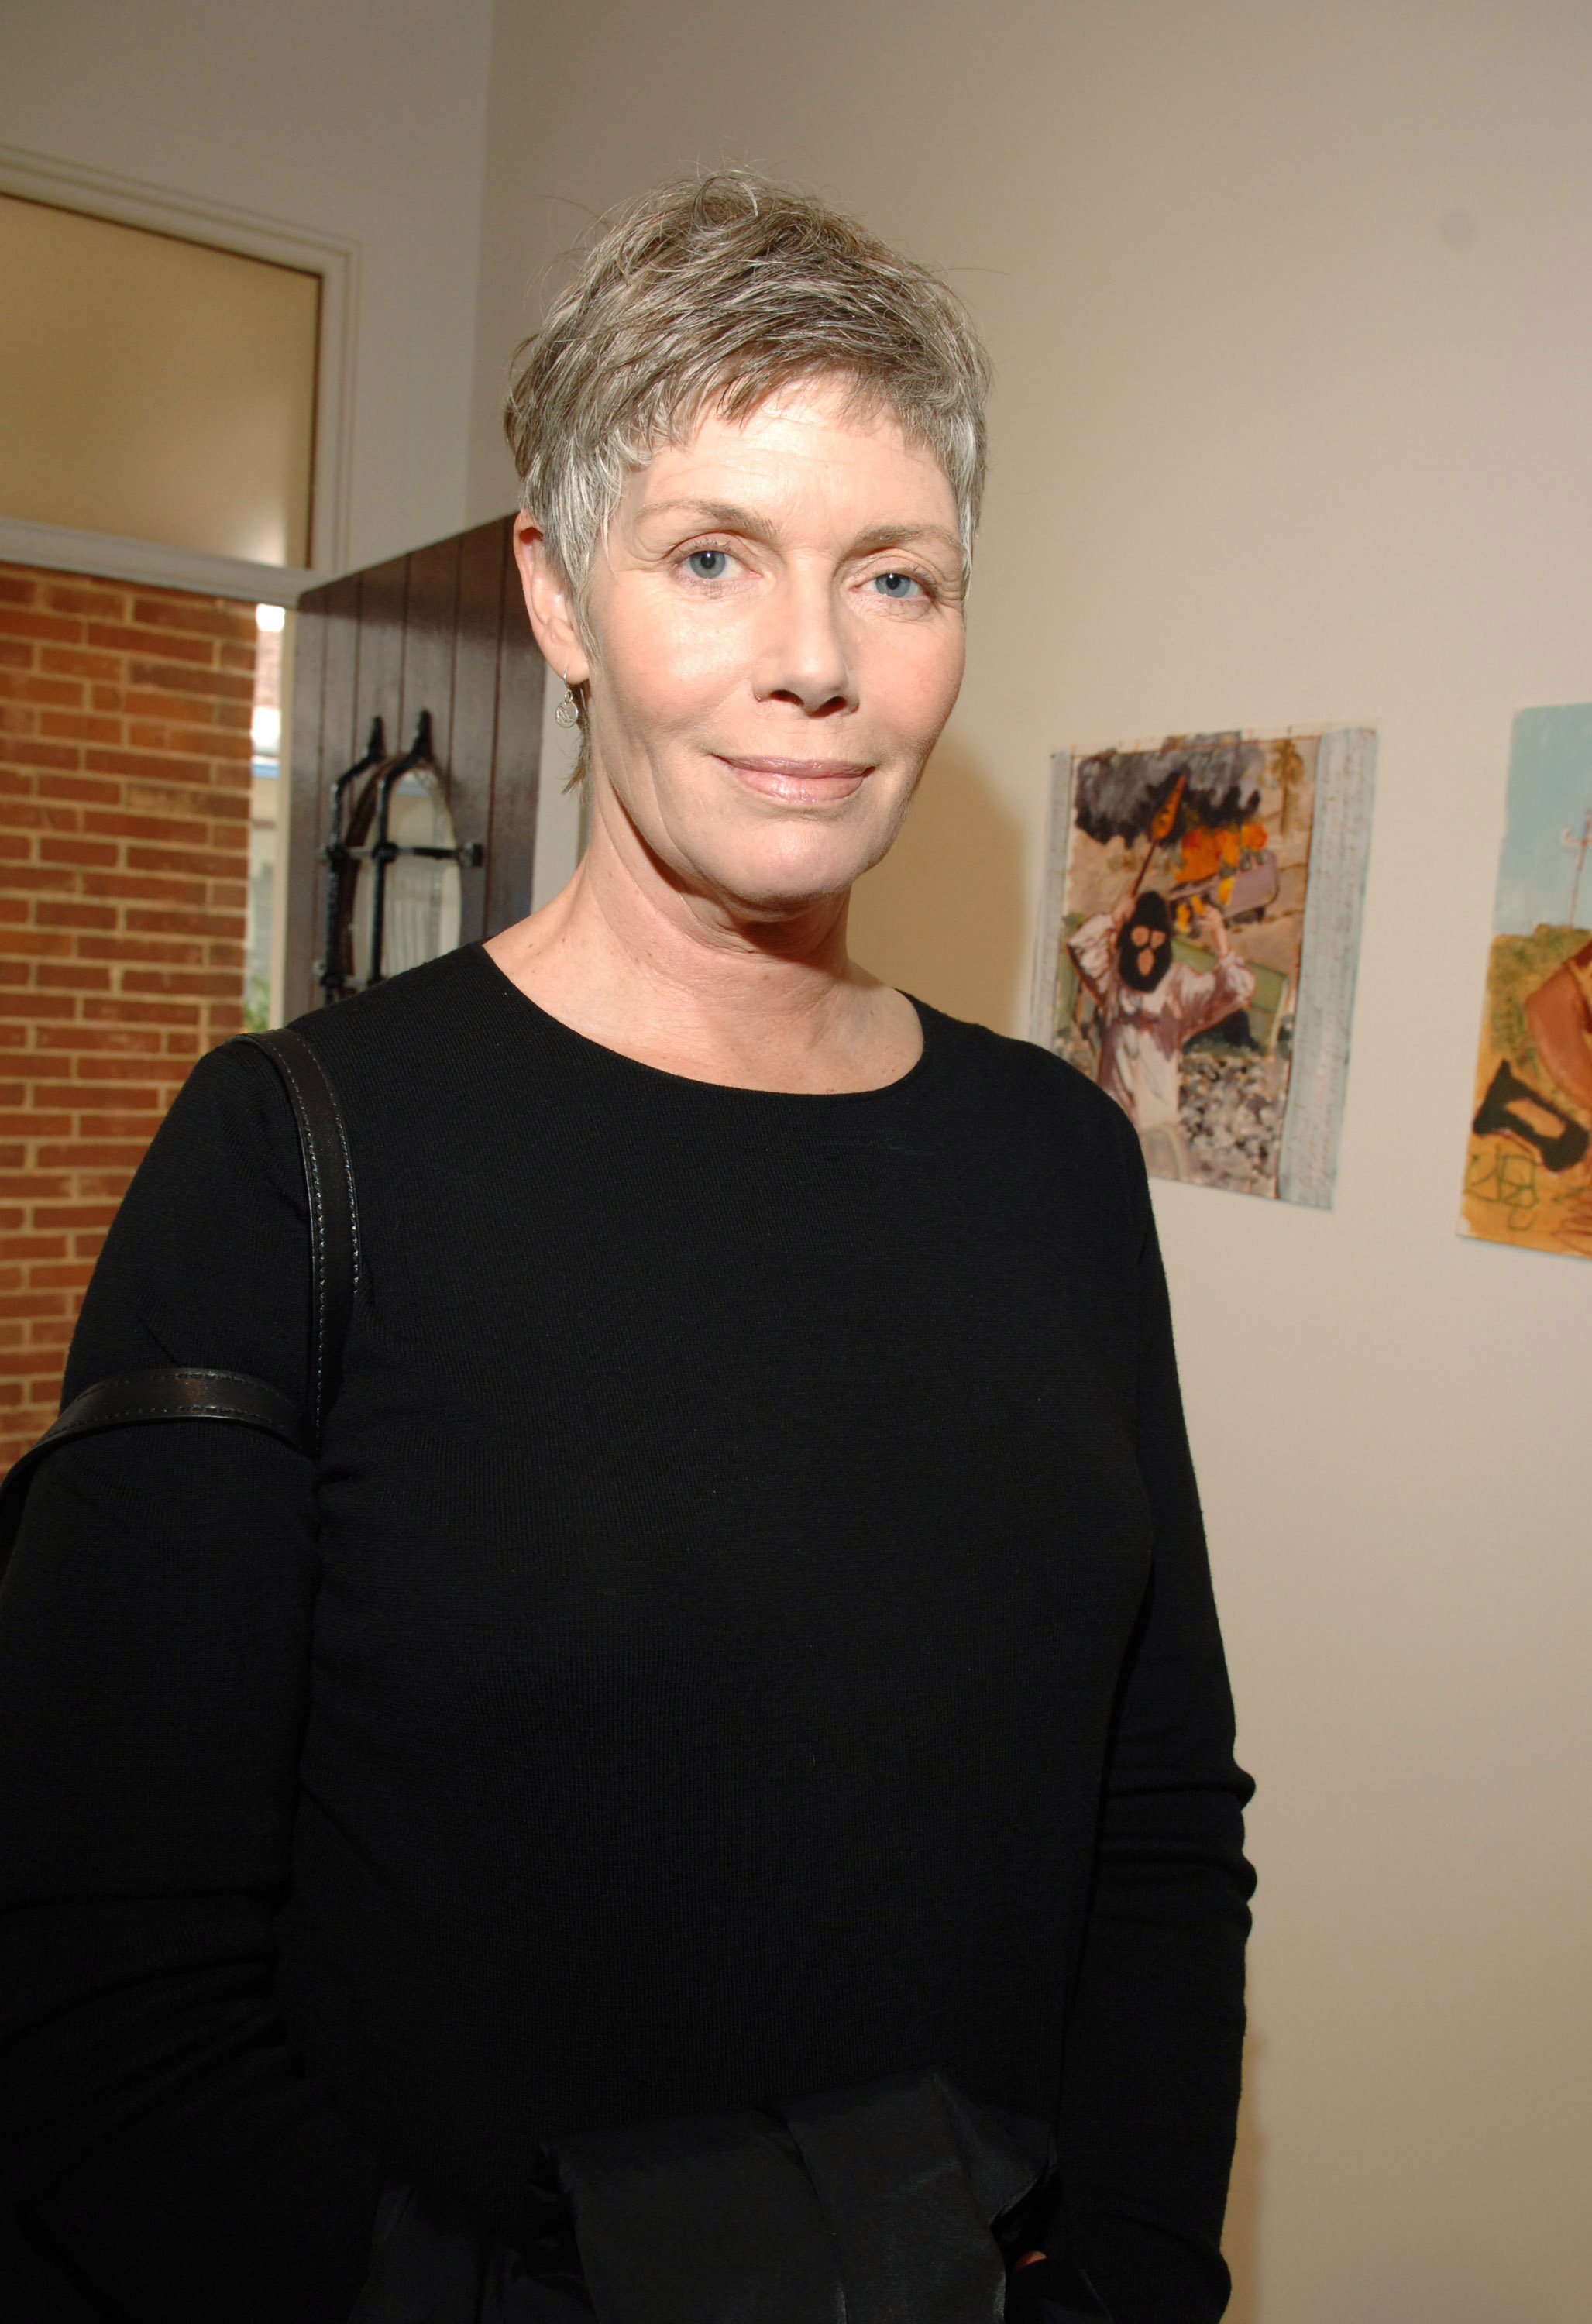 Kelly McGillis at the Mary Lambert Art Show in 2007 | Source: Getty Images